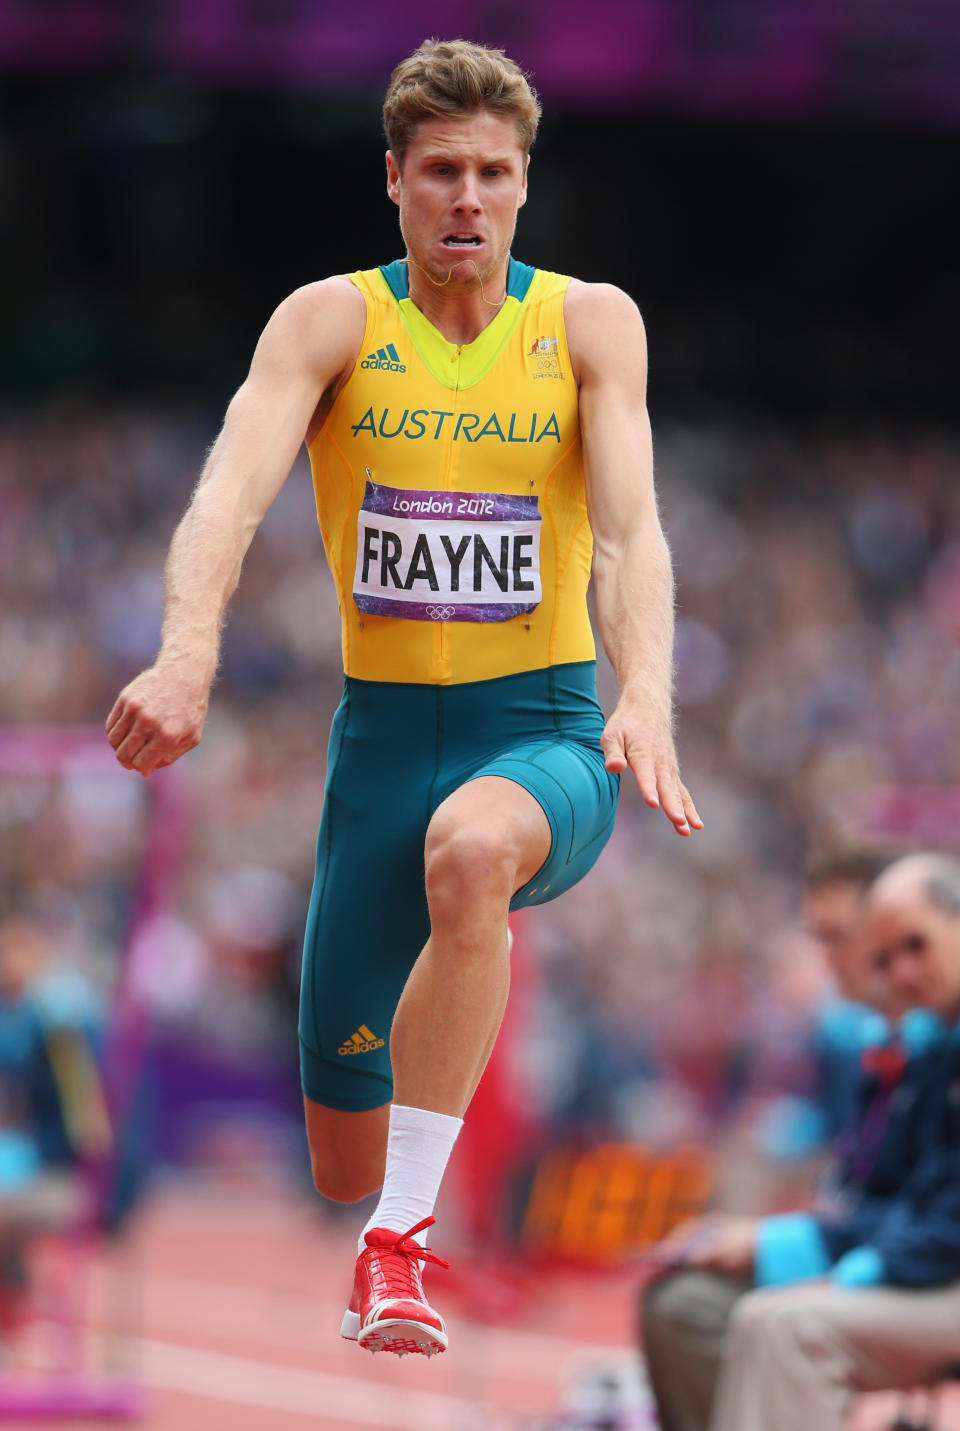 LONDON, ENGLAND - AUGUST 07: Henry Frayne of Australia competes in the Men's Triple Jump Qualification on Day 11 of the London 2012 Olympic Games at Olympic Stadium on August 7, 2012 in London, England. (Photo by Alexander Hassenstein/Getty Images)